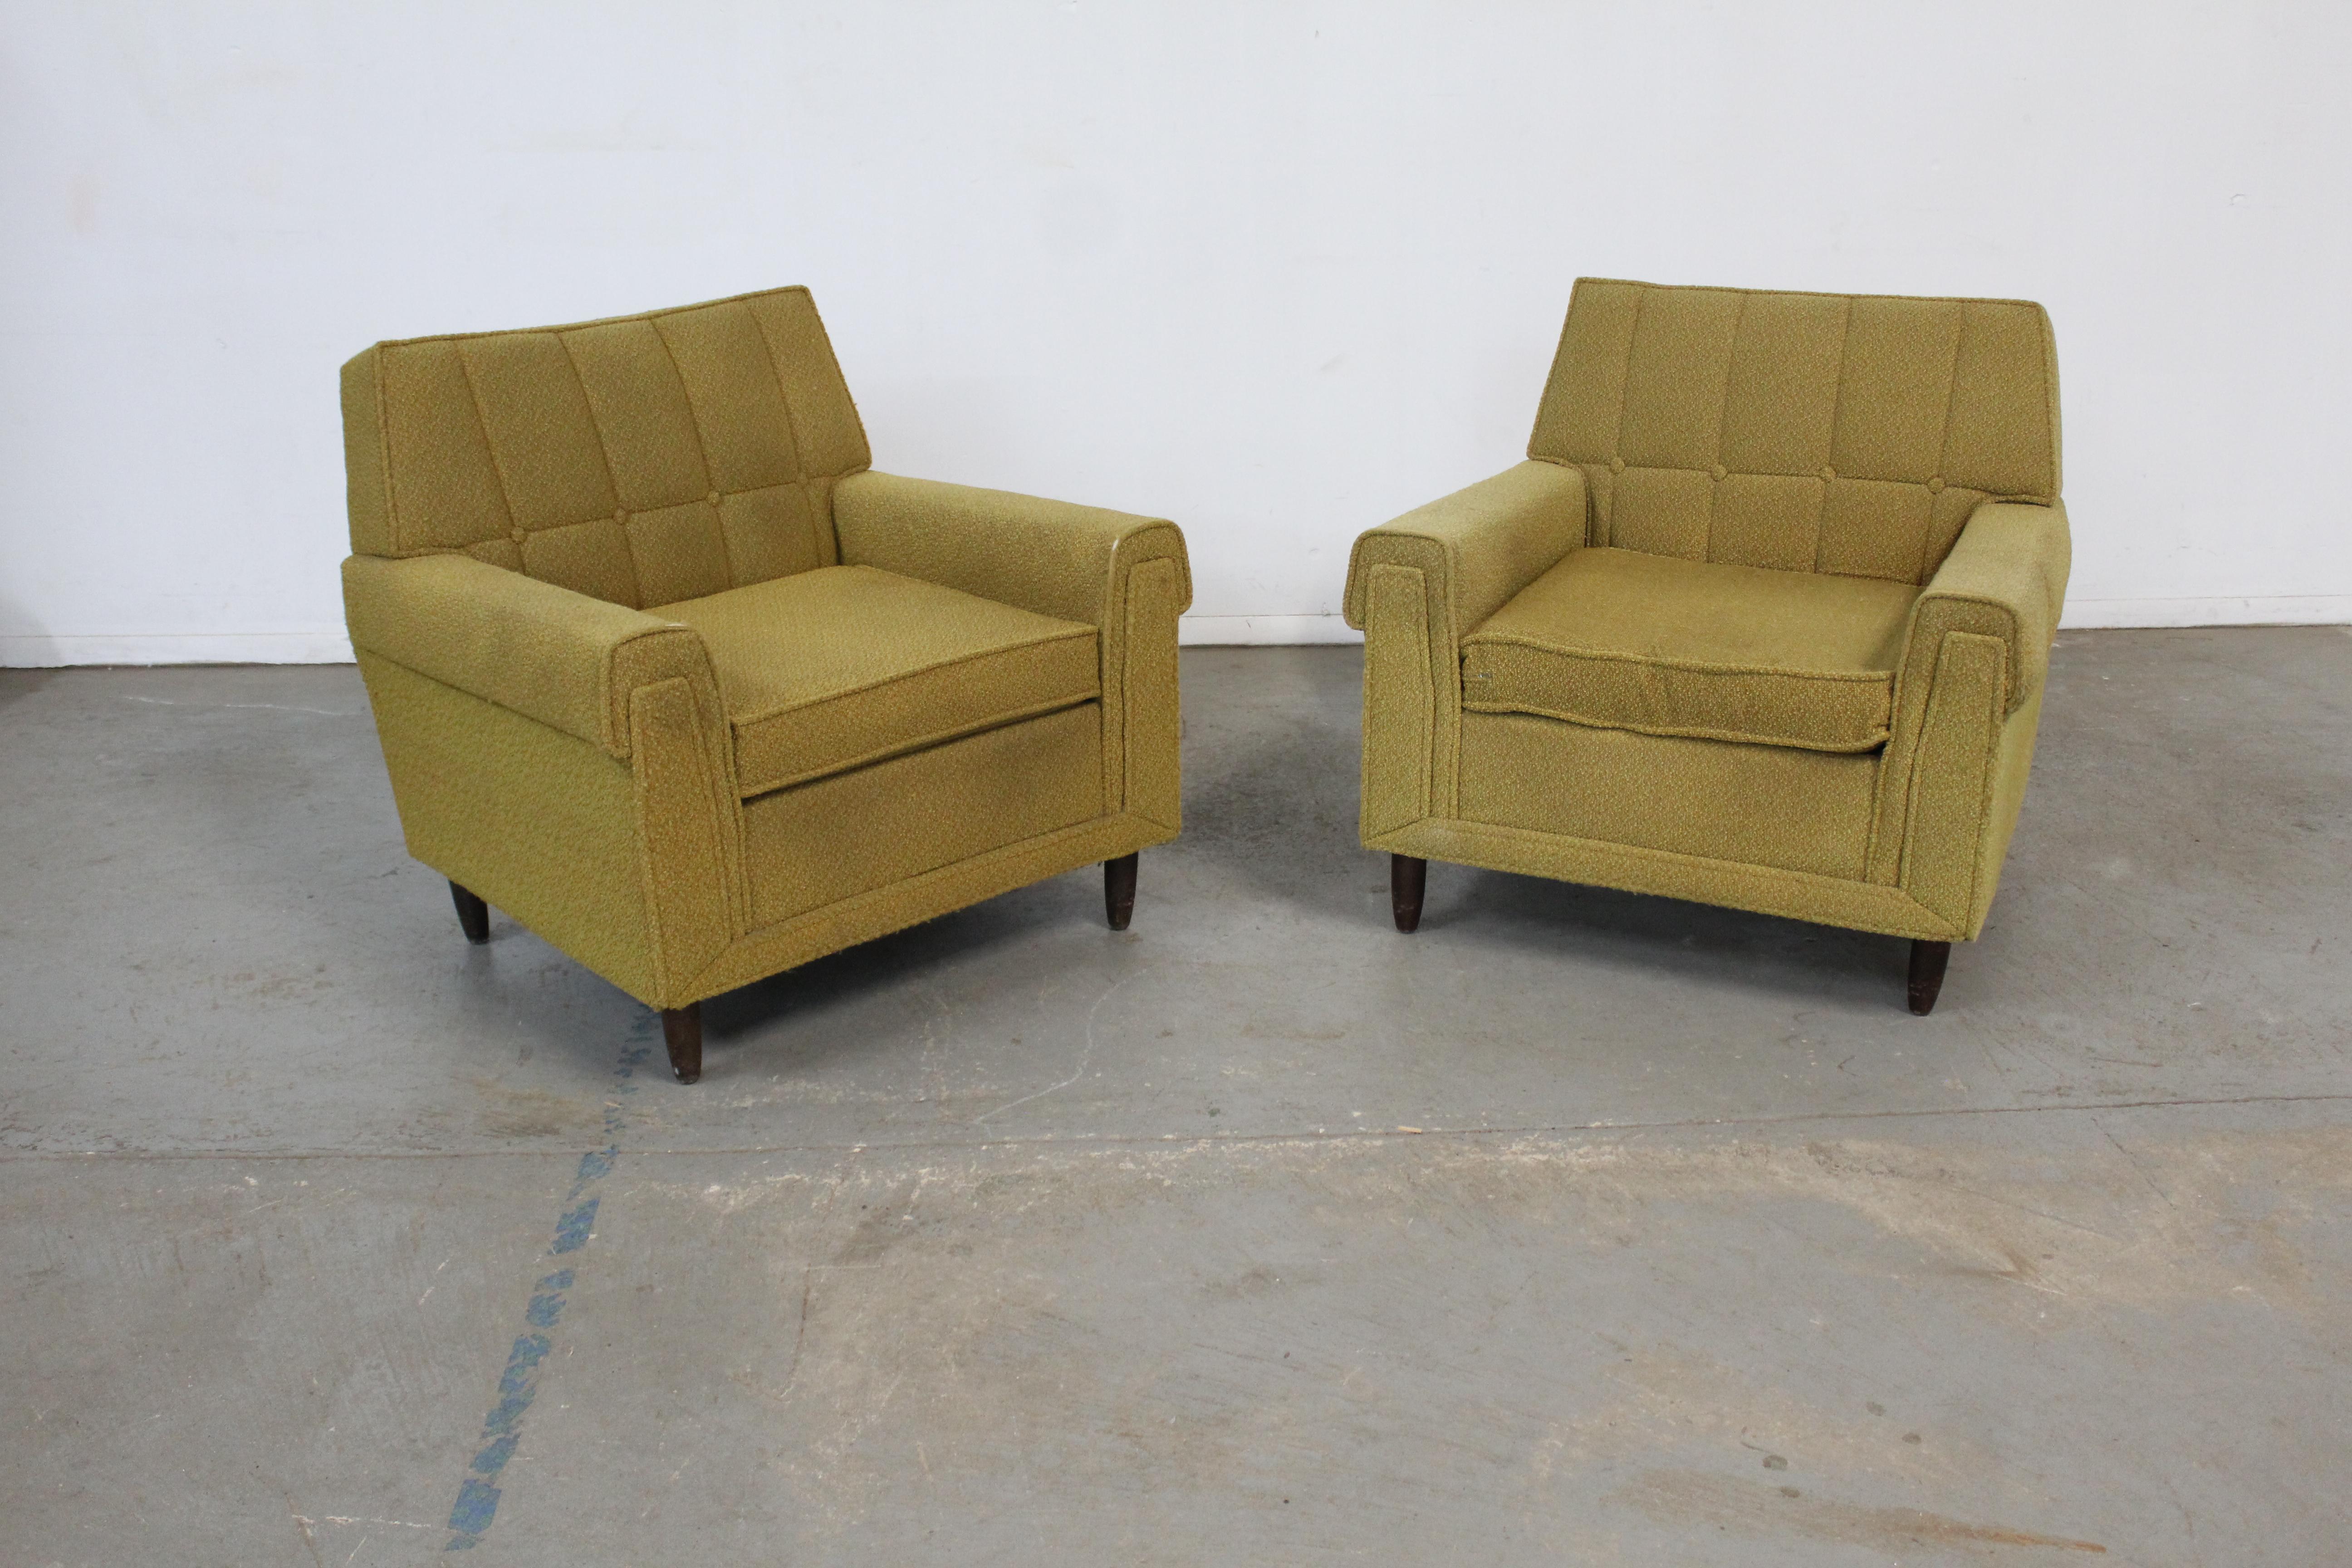 Pair of Vintage Mid-Century Kroehler Style lounge club chairs.

Offered is a pair of vintage Mid-Century Modern style lounge/club chairs. The pair is elevated on Pencil Legs. These chairs have great lines and are similar in style to Edward Wormley